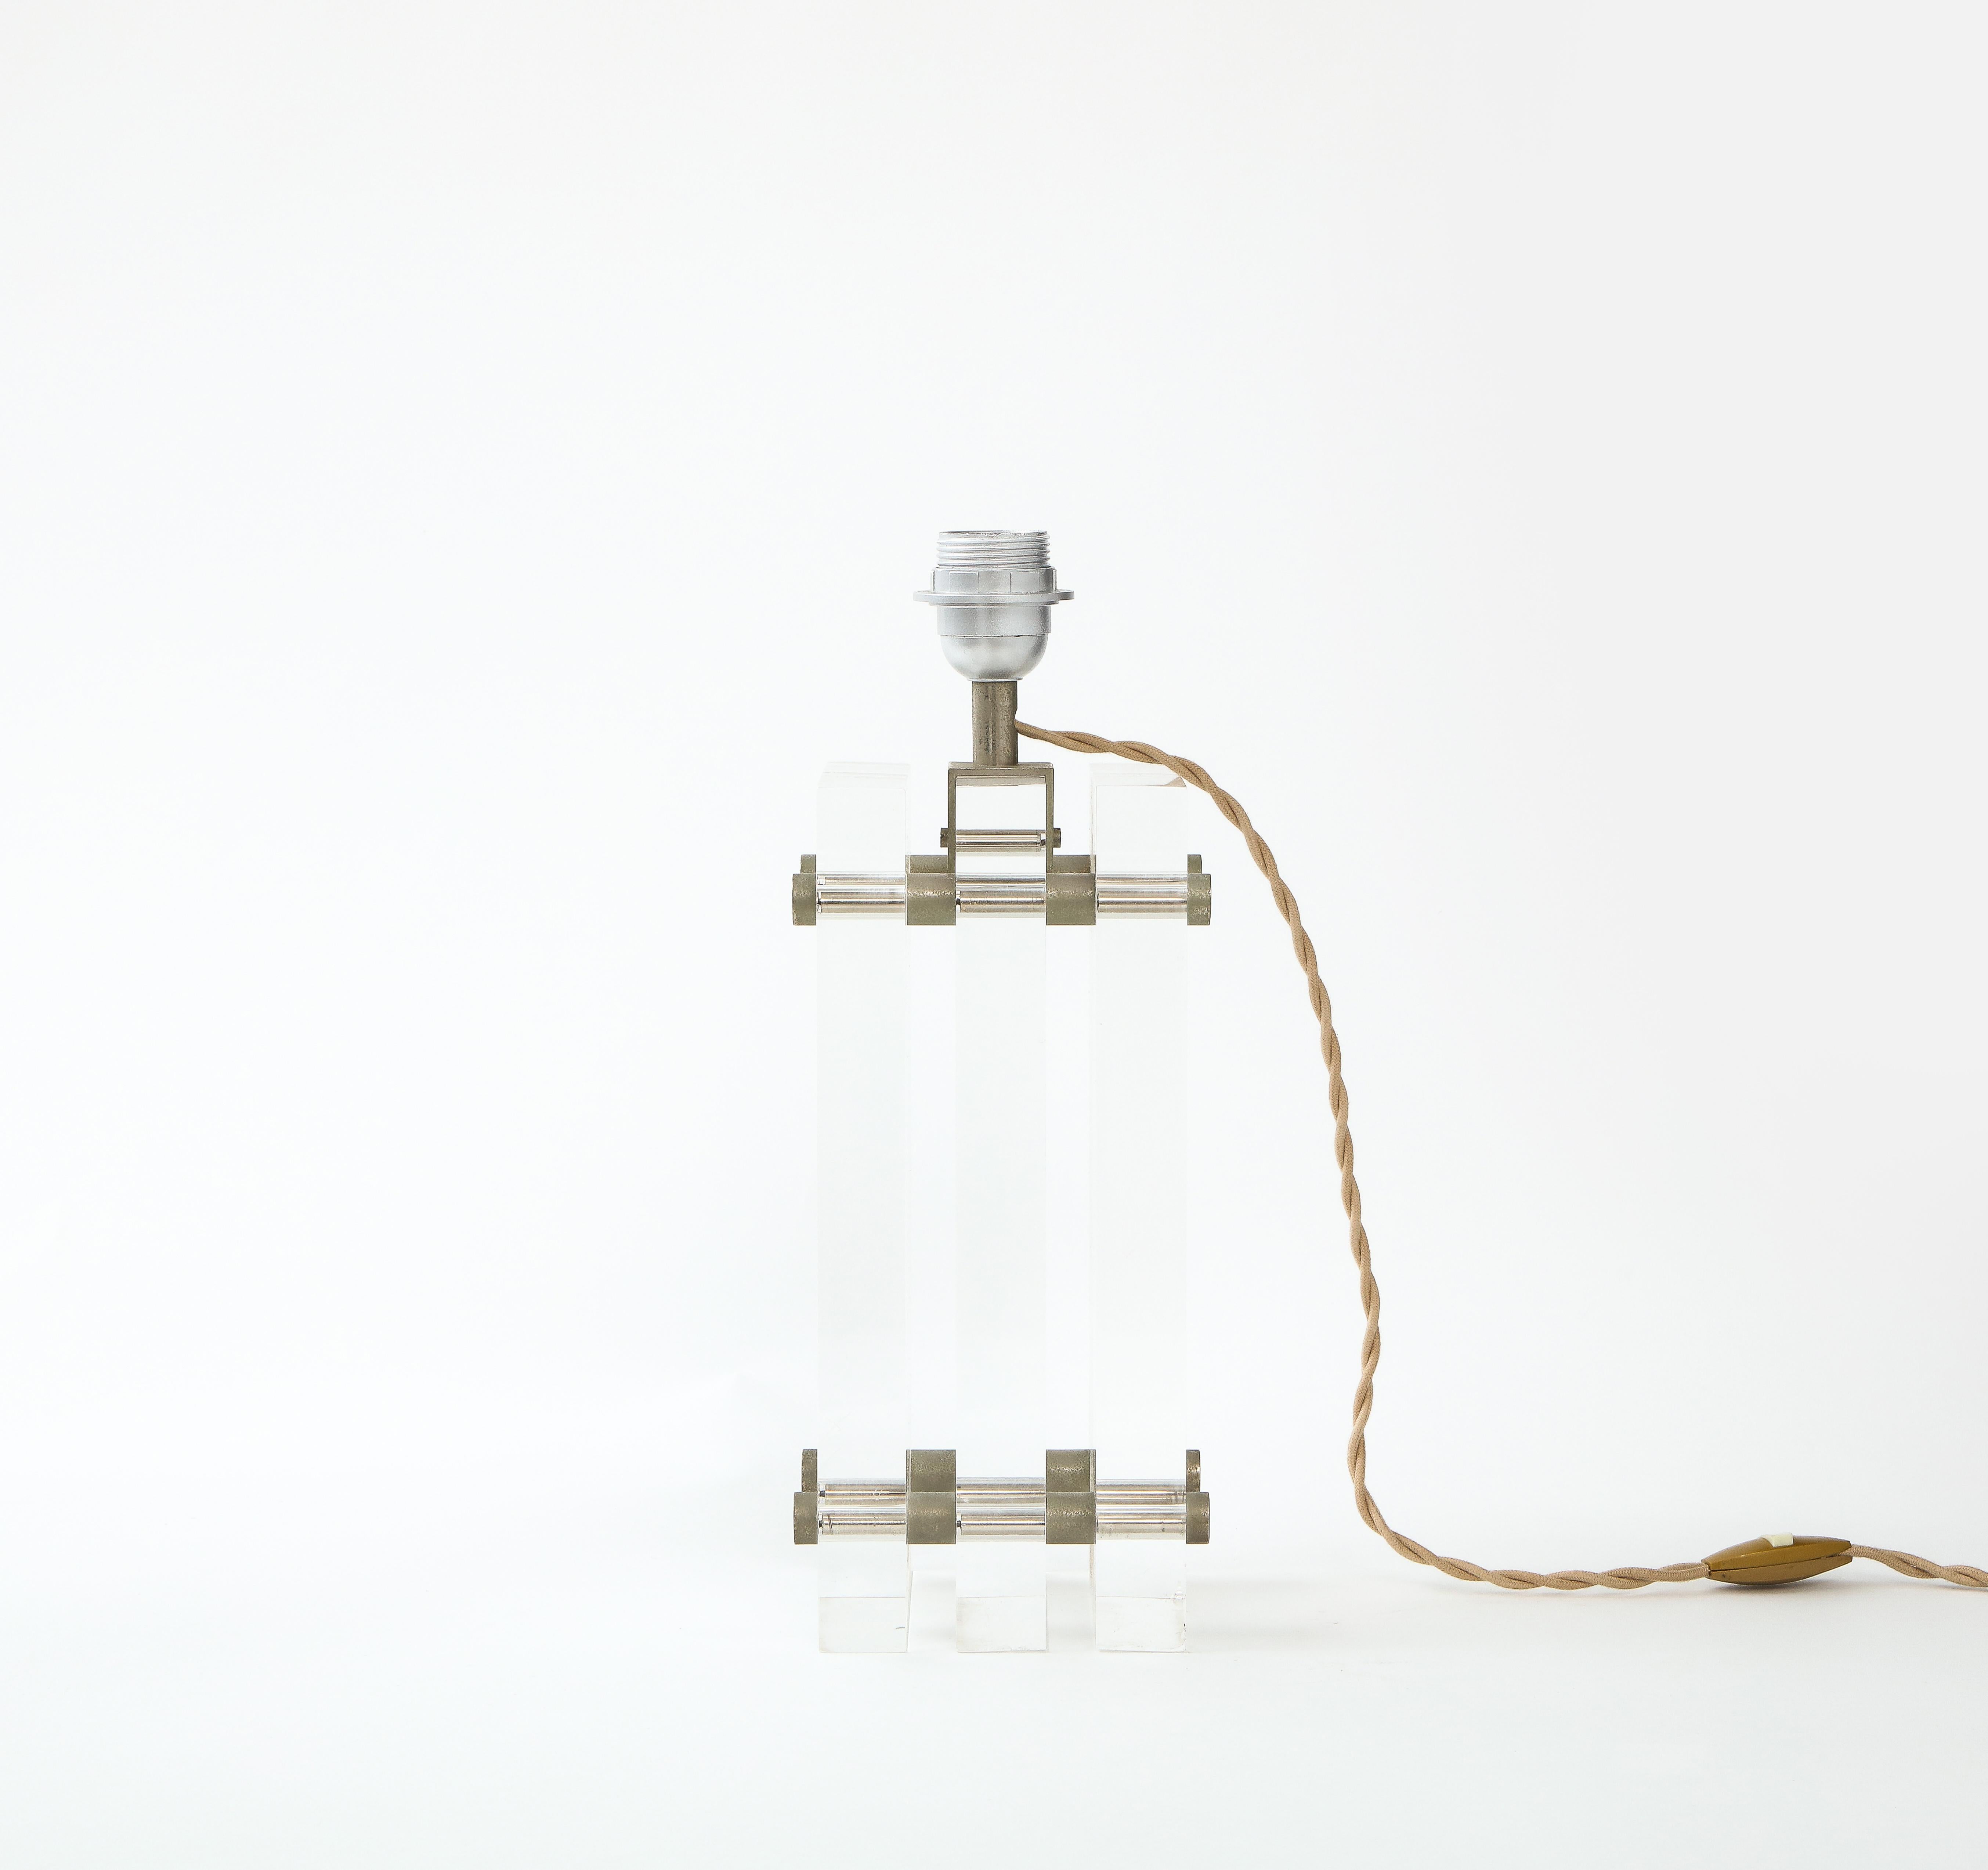 Acrylic Table Lamp with Metal Hardware, France 1970’s For Sale 4